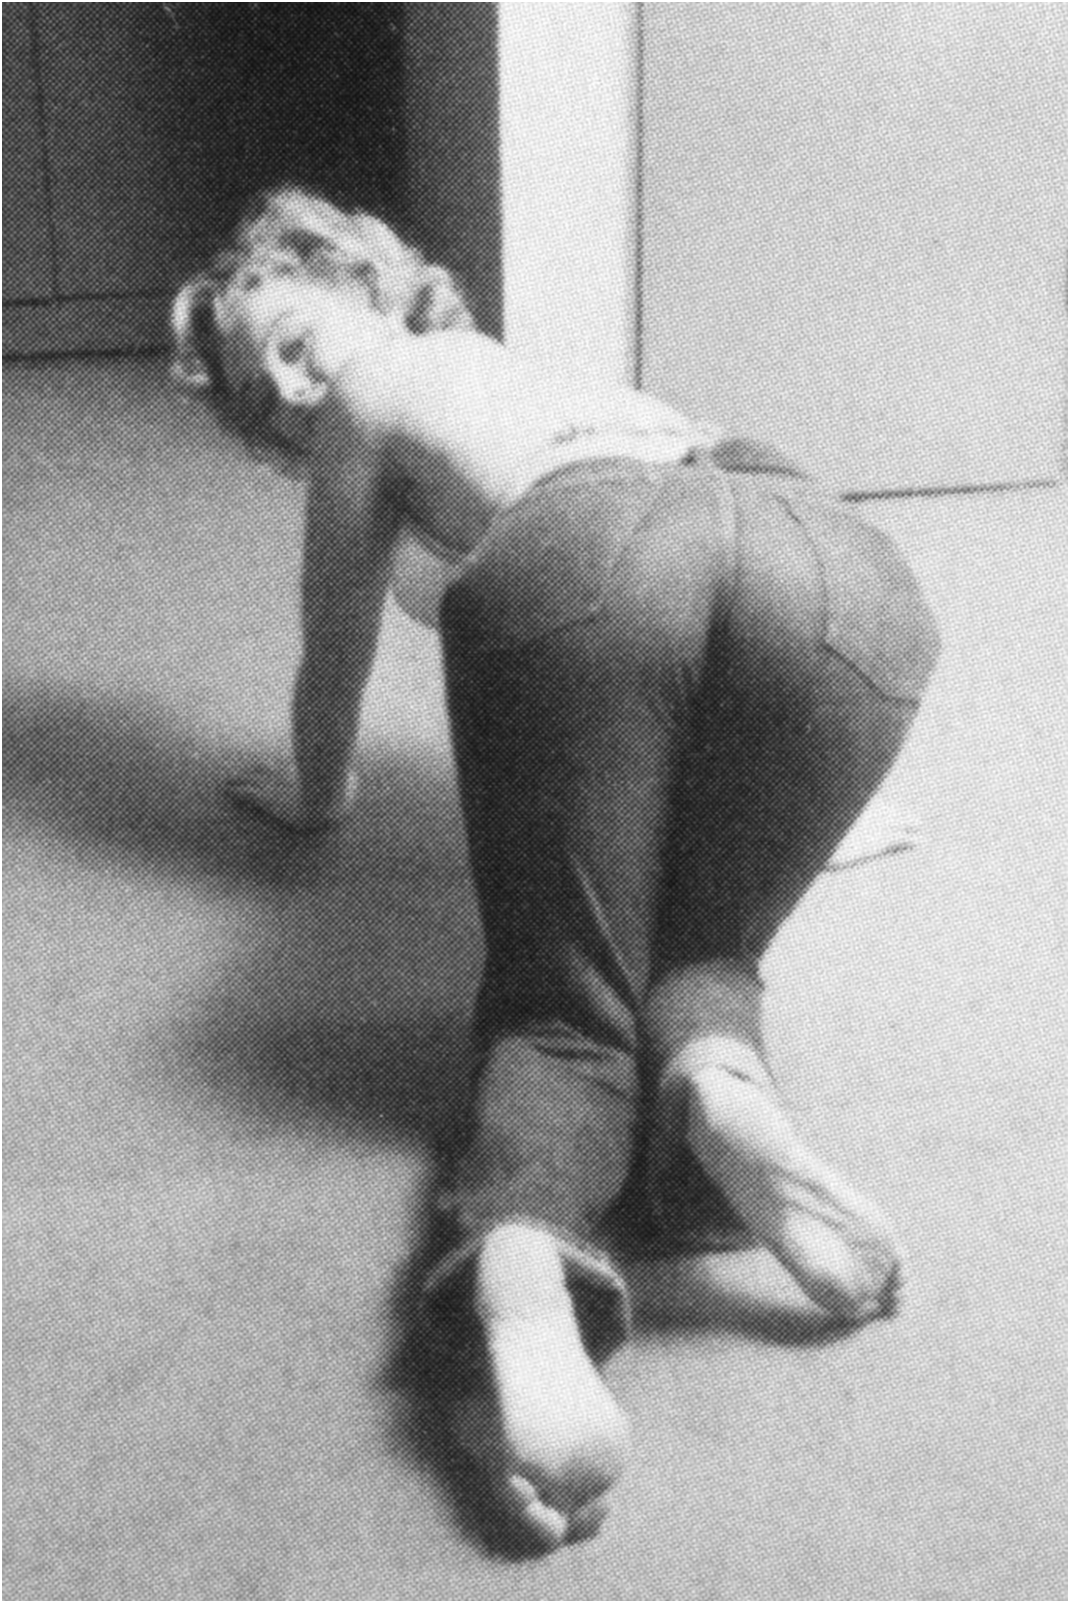 Marilyn Monroe's Lost Nude Scene Locked Away For Decades Re